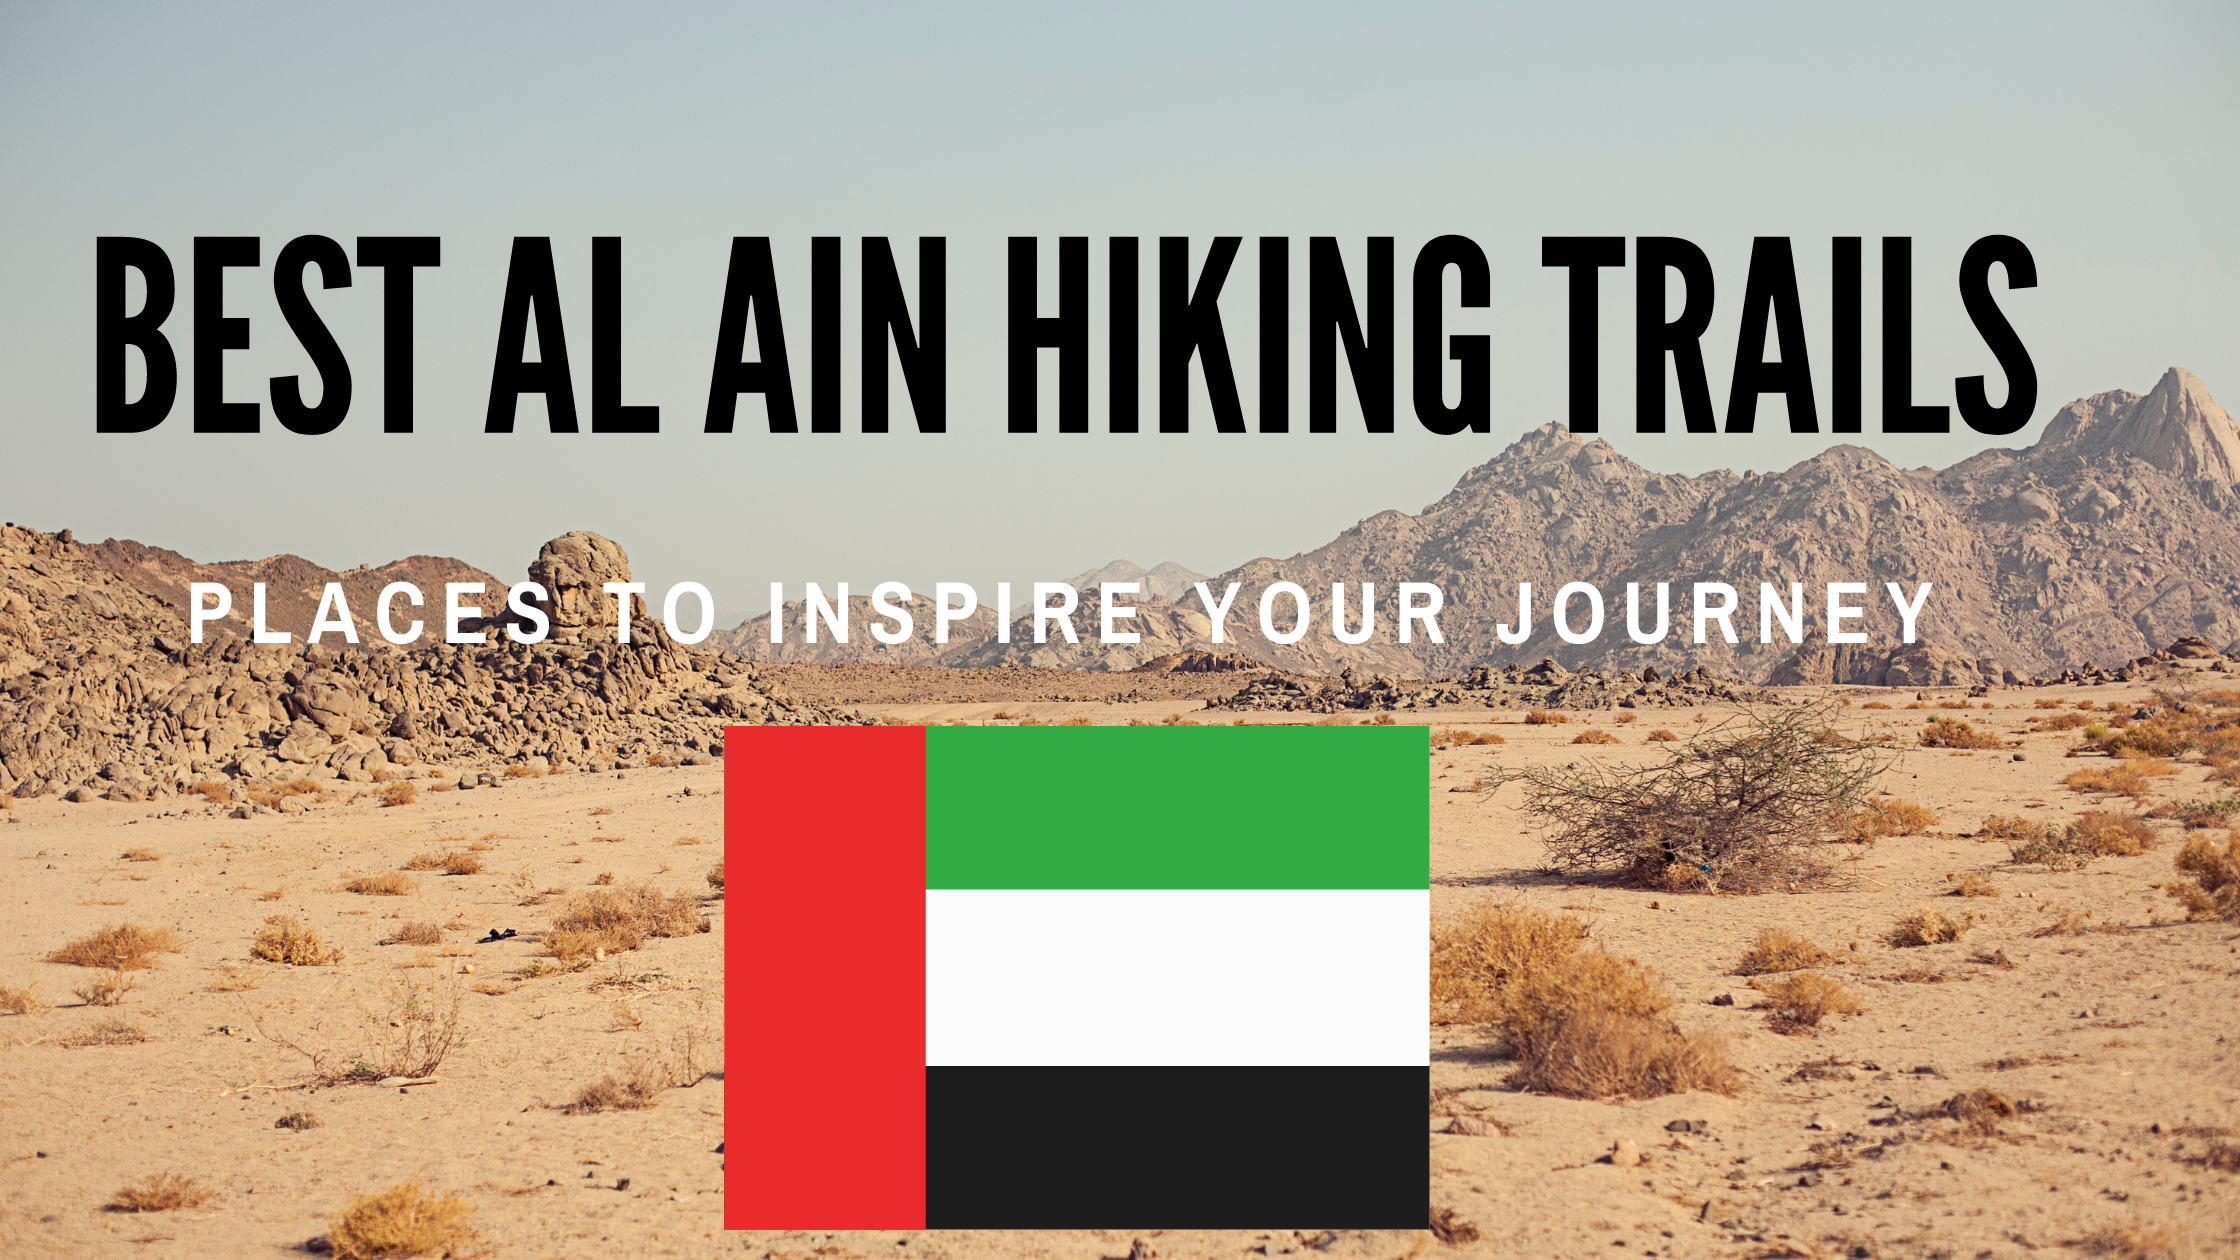 Trekking Through Al Ain A Guide to the Best Hiking Trails